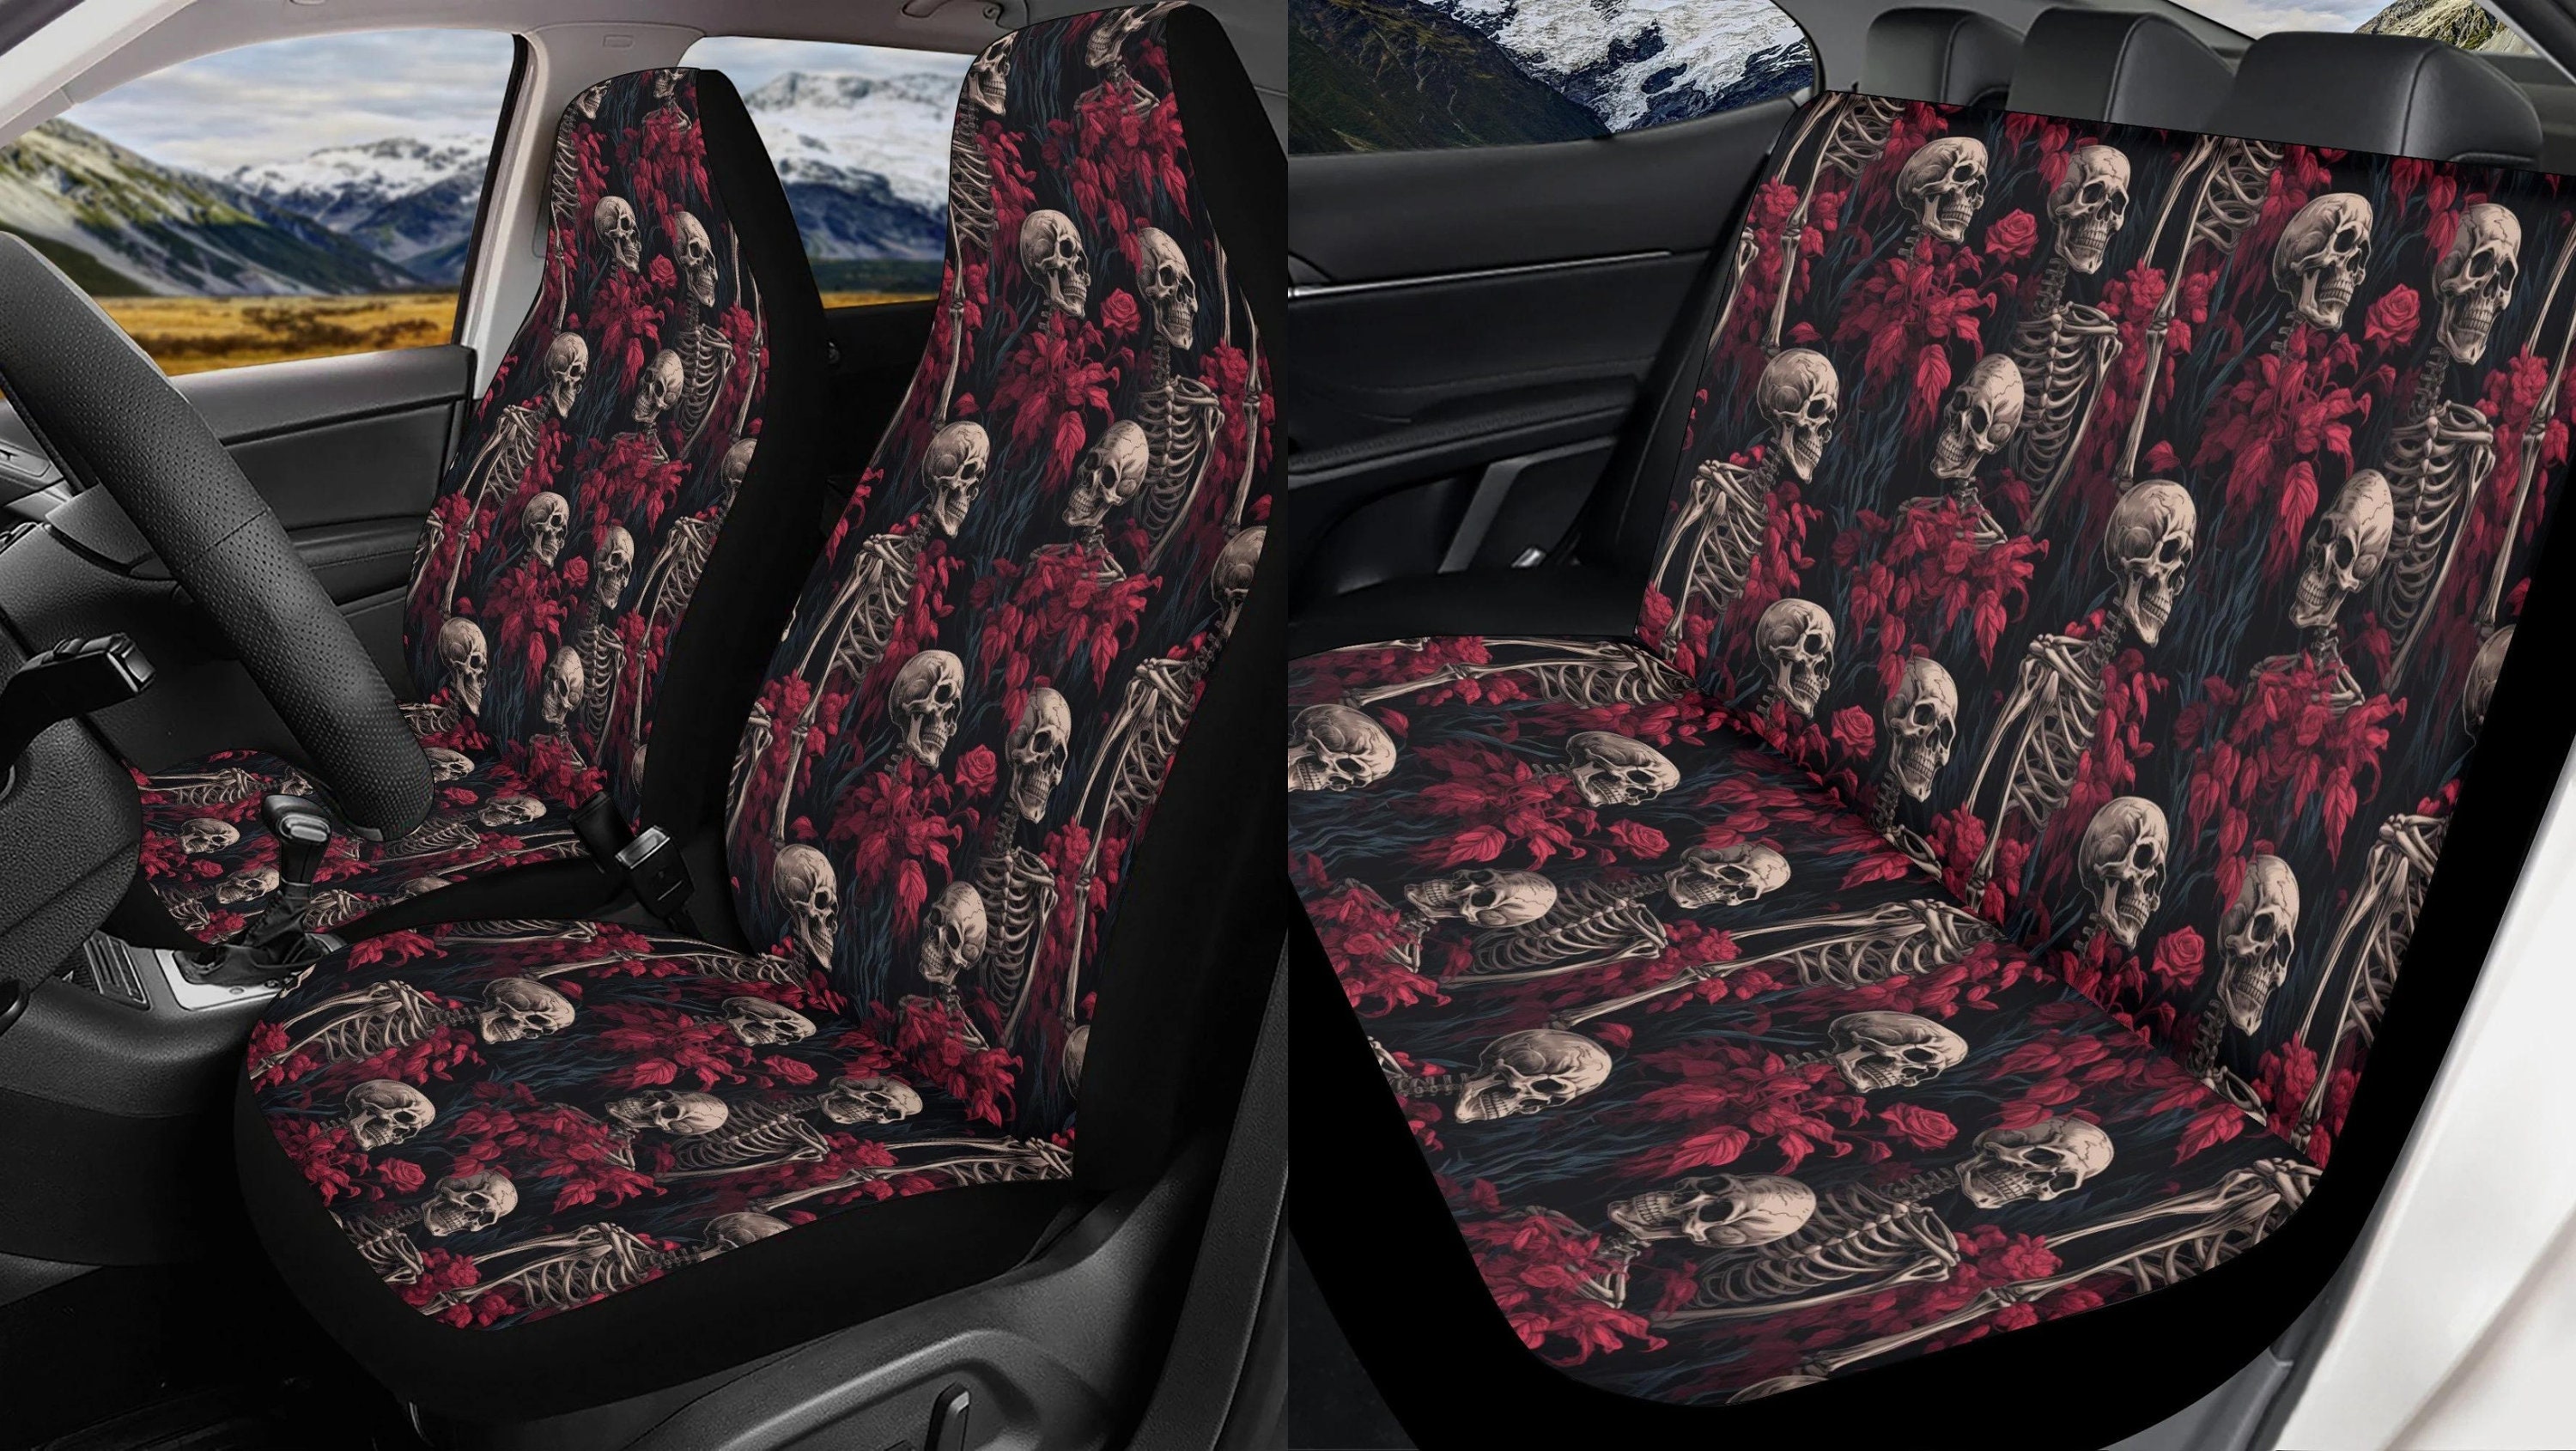 Dancing Skeleton Halloween Car Seat Covers, Gothic Spooky Car Seat covers